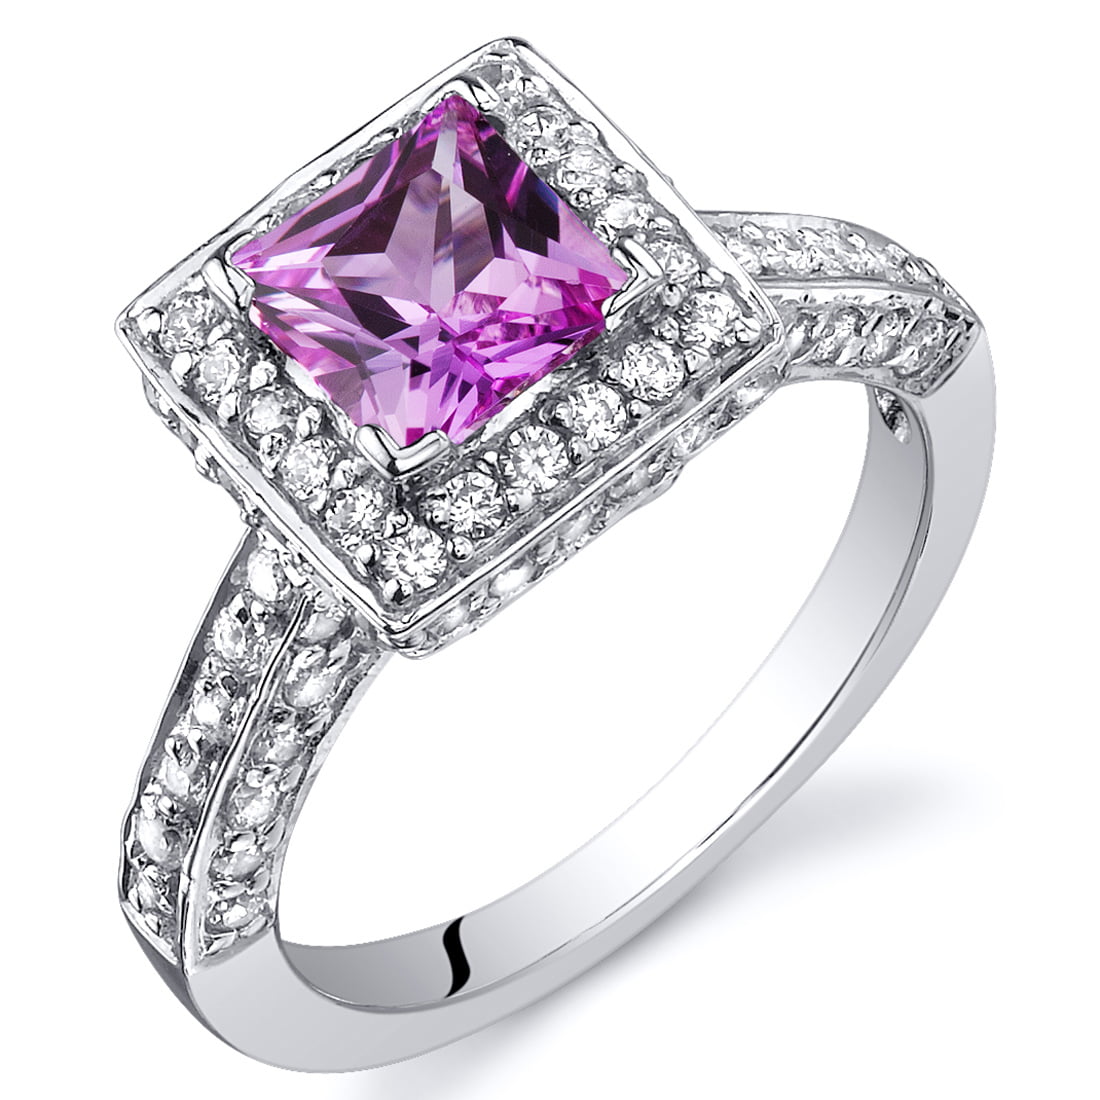 14k White Gold Over 925 Sterling Silver 1.00 Ct Princess Cut Pink Sapphire and CZ Simulated Diamond Engagement Ring Women